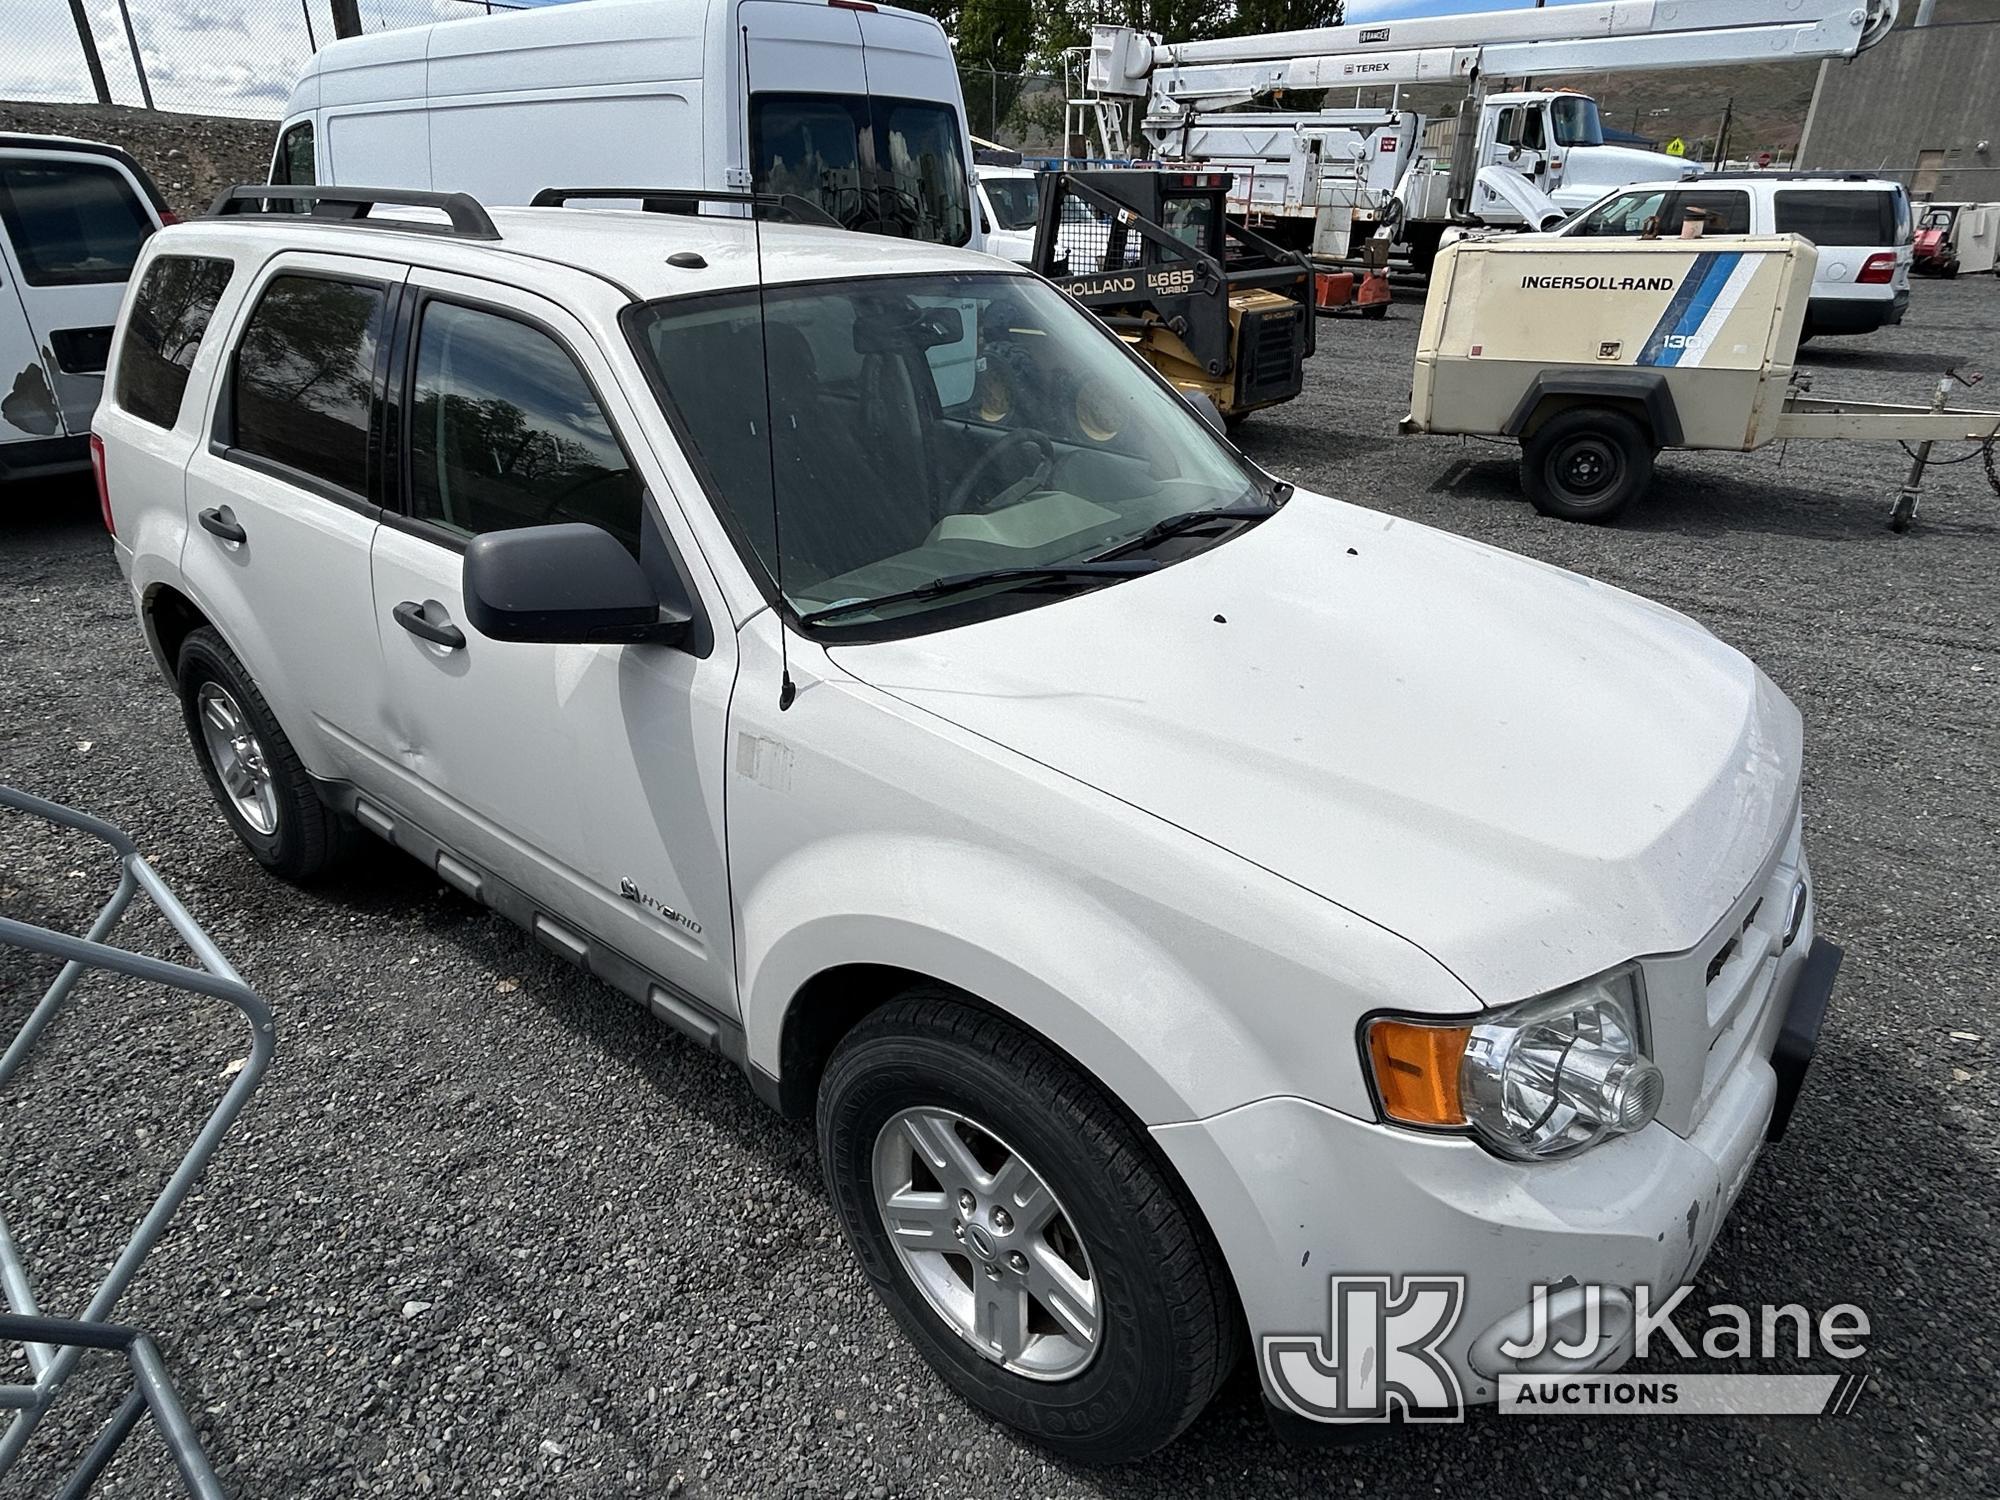 (Ephrata, WA) 2009 Ford Escape 4x4 Sport Utility Vehicle Not Running, Condition Unknown)   (Hybrid B